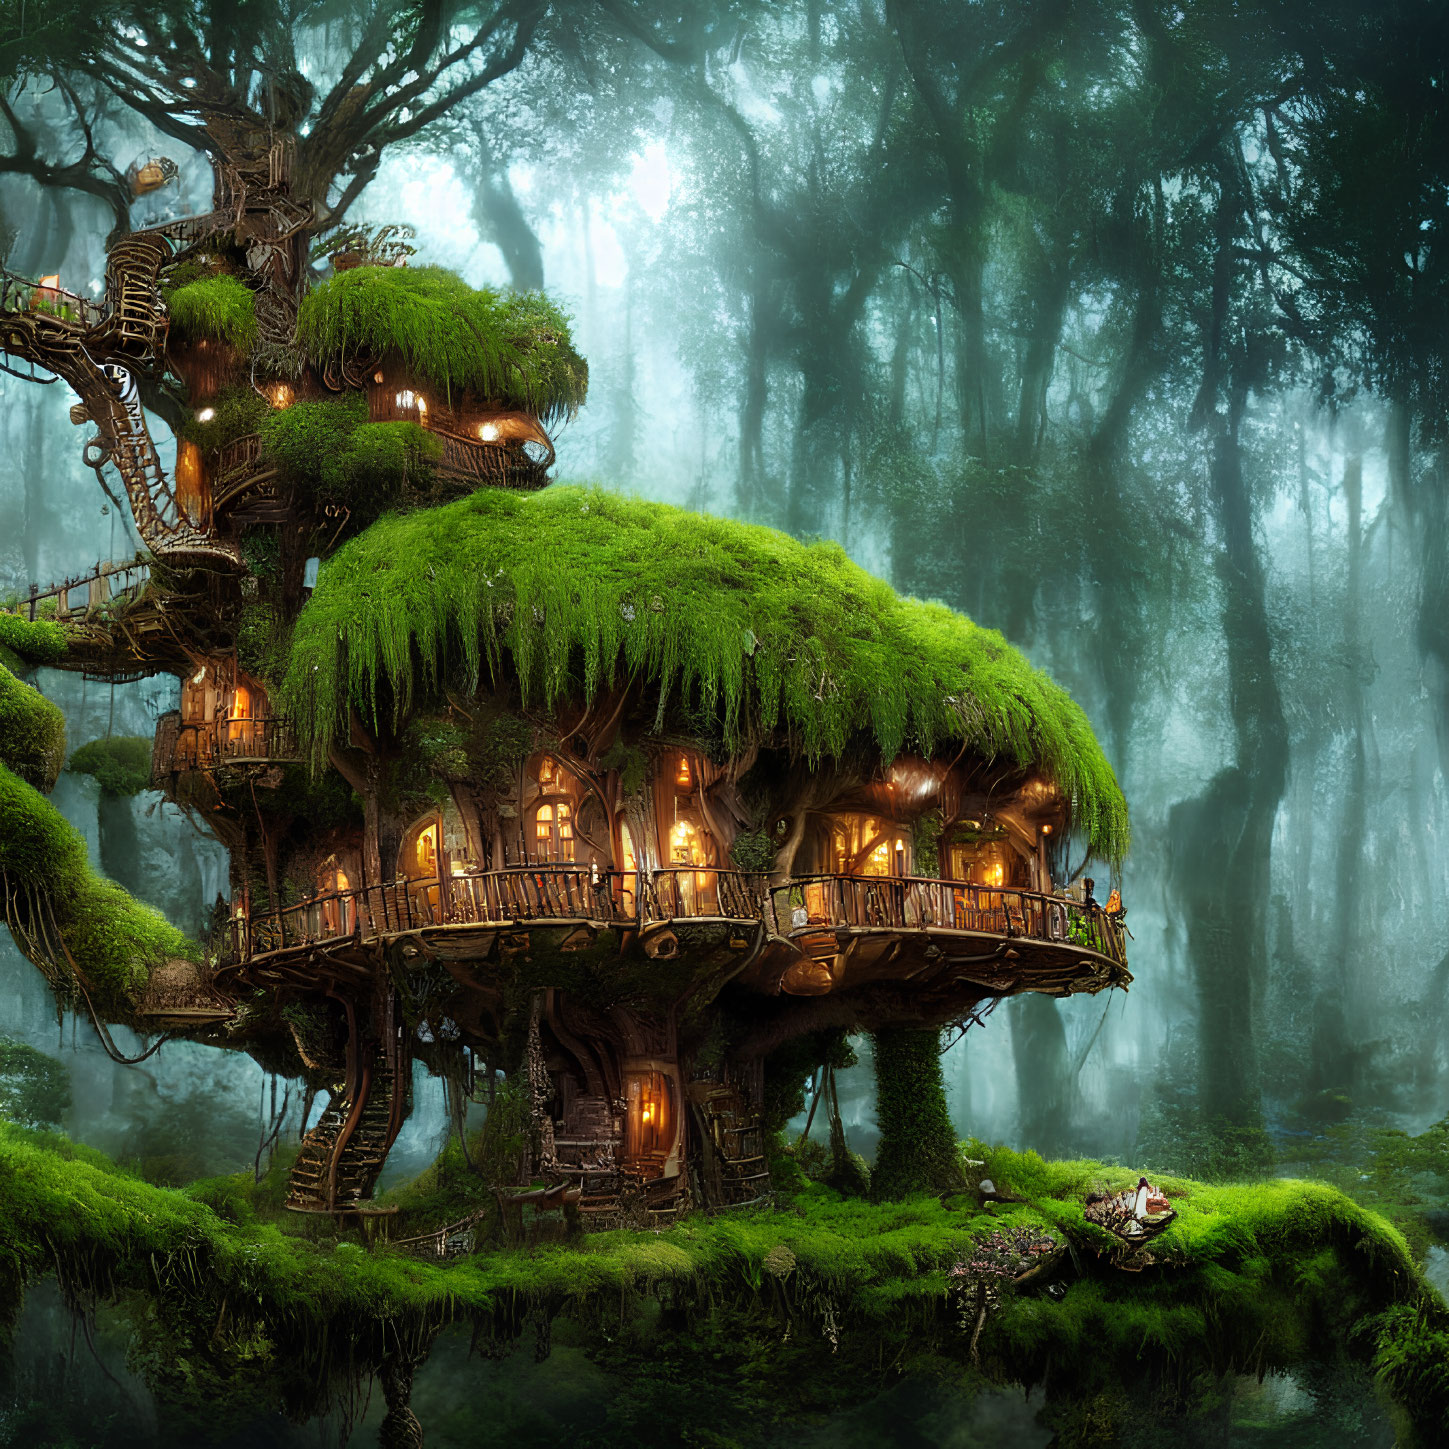 Enchanting treehouse with winding staircases in mystical forest